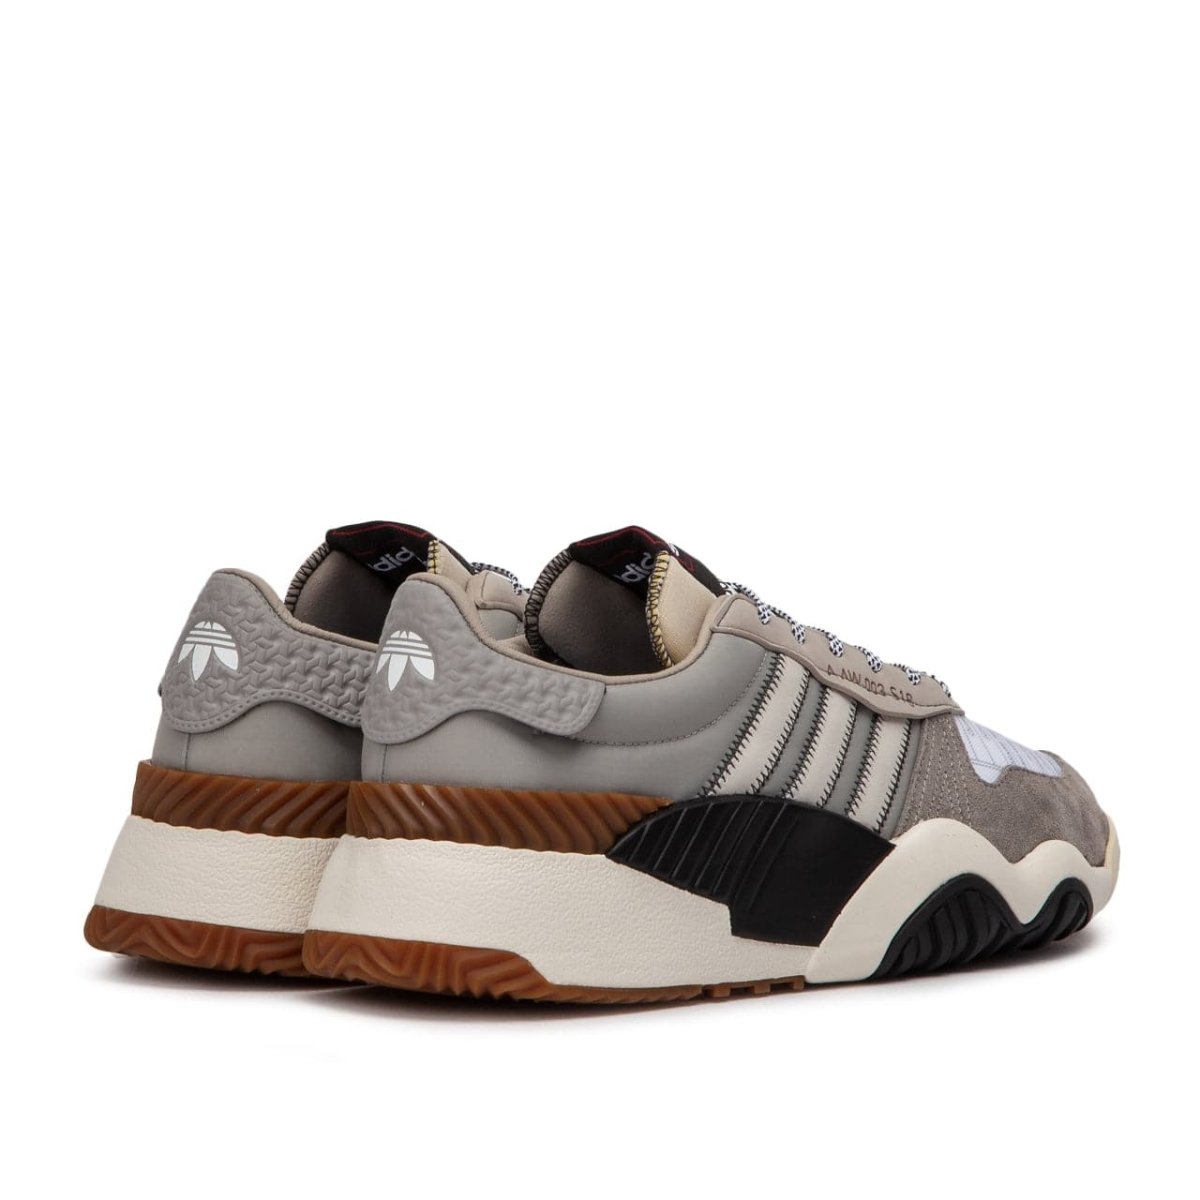 adidas by Wang Turnout Trainer (Light Brown / Black) B43589 – Allike